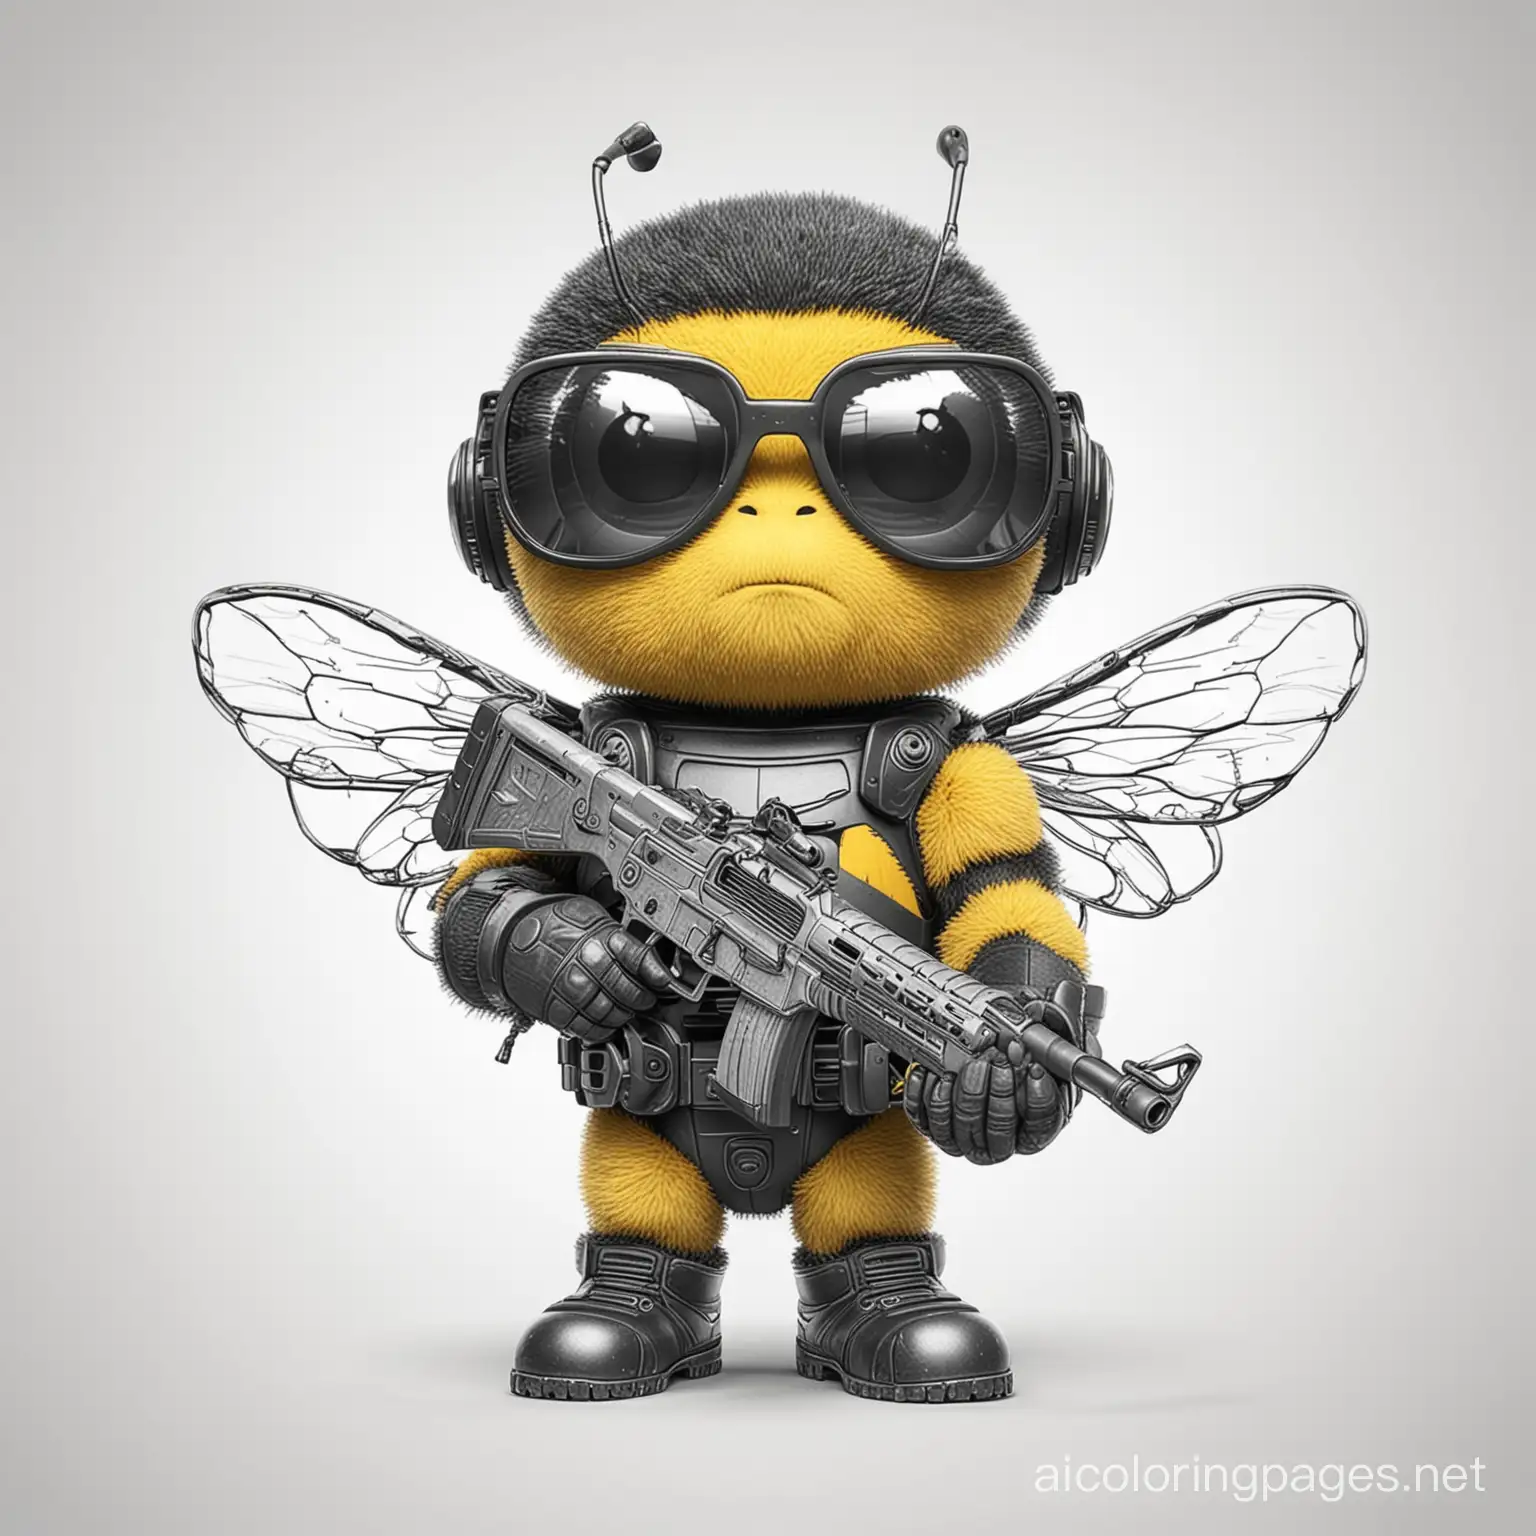 Cool-Bumble-Bee-with-Sunglasses-and-Shotgun-Coloring-Page